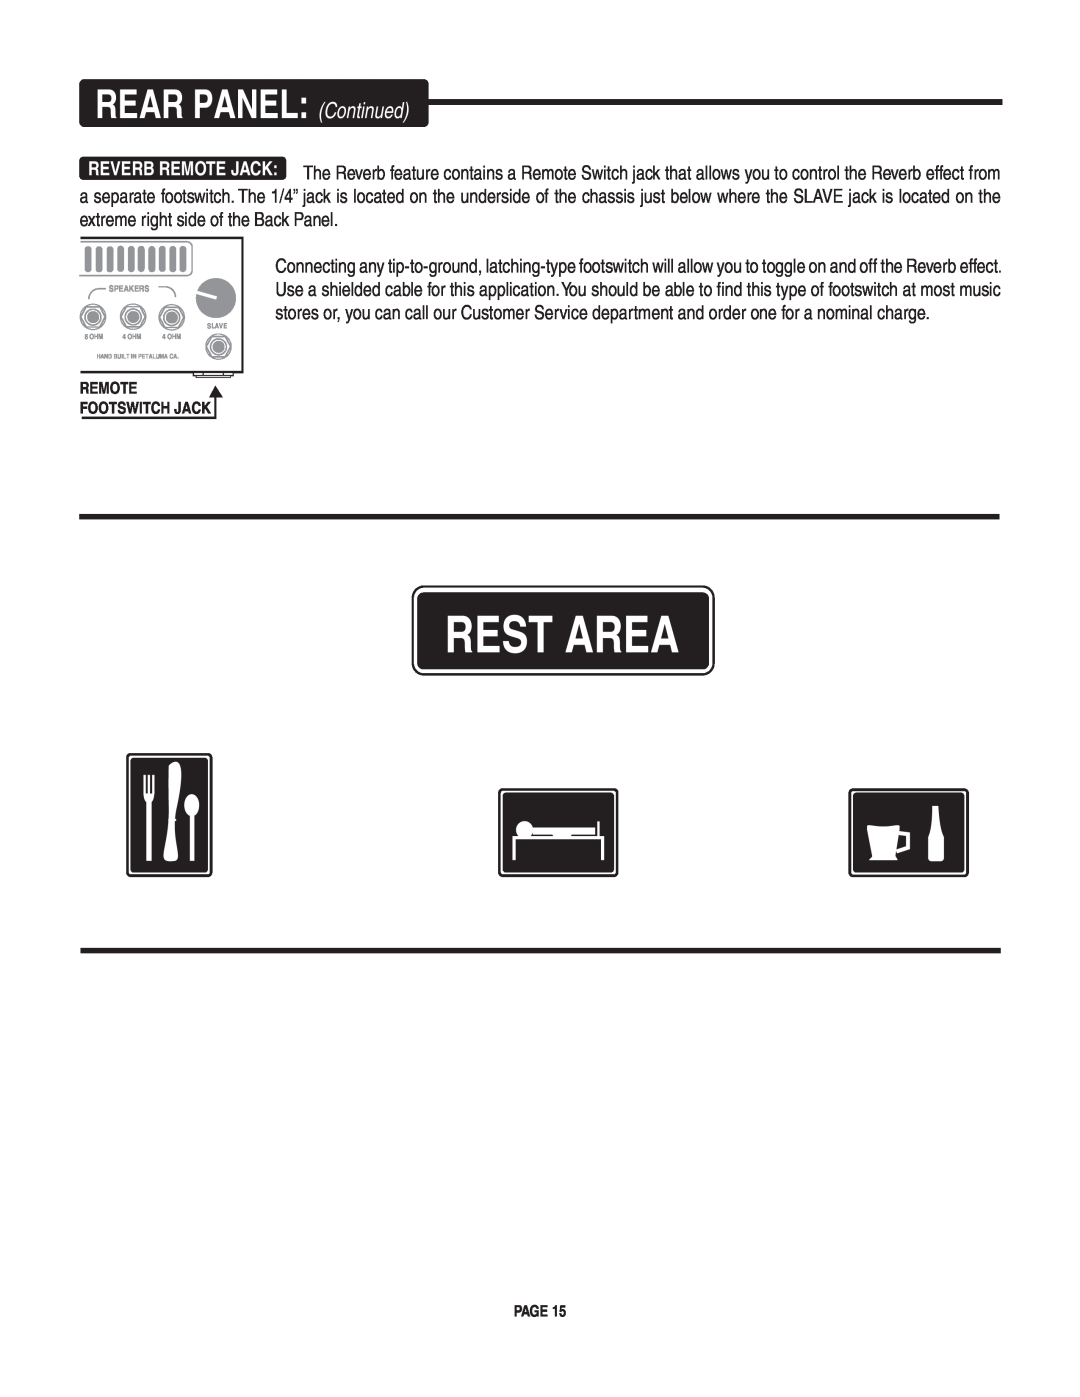 Mesa/Boogie LoneStar Amplifier owner manual Rest Area, REAR PANEL Continued, Remote Footswitch Jack, Page 